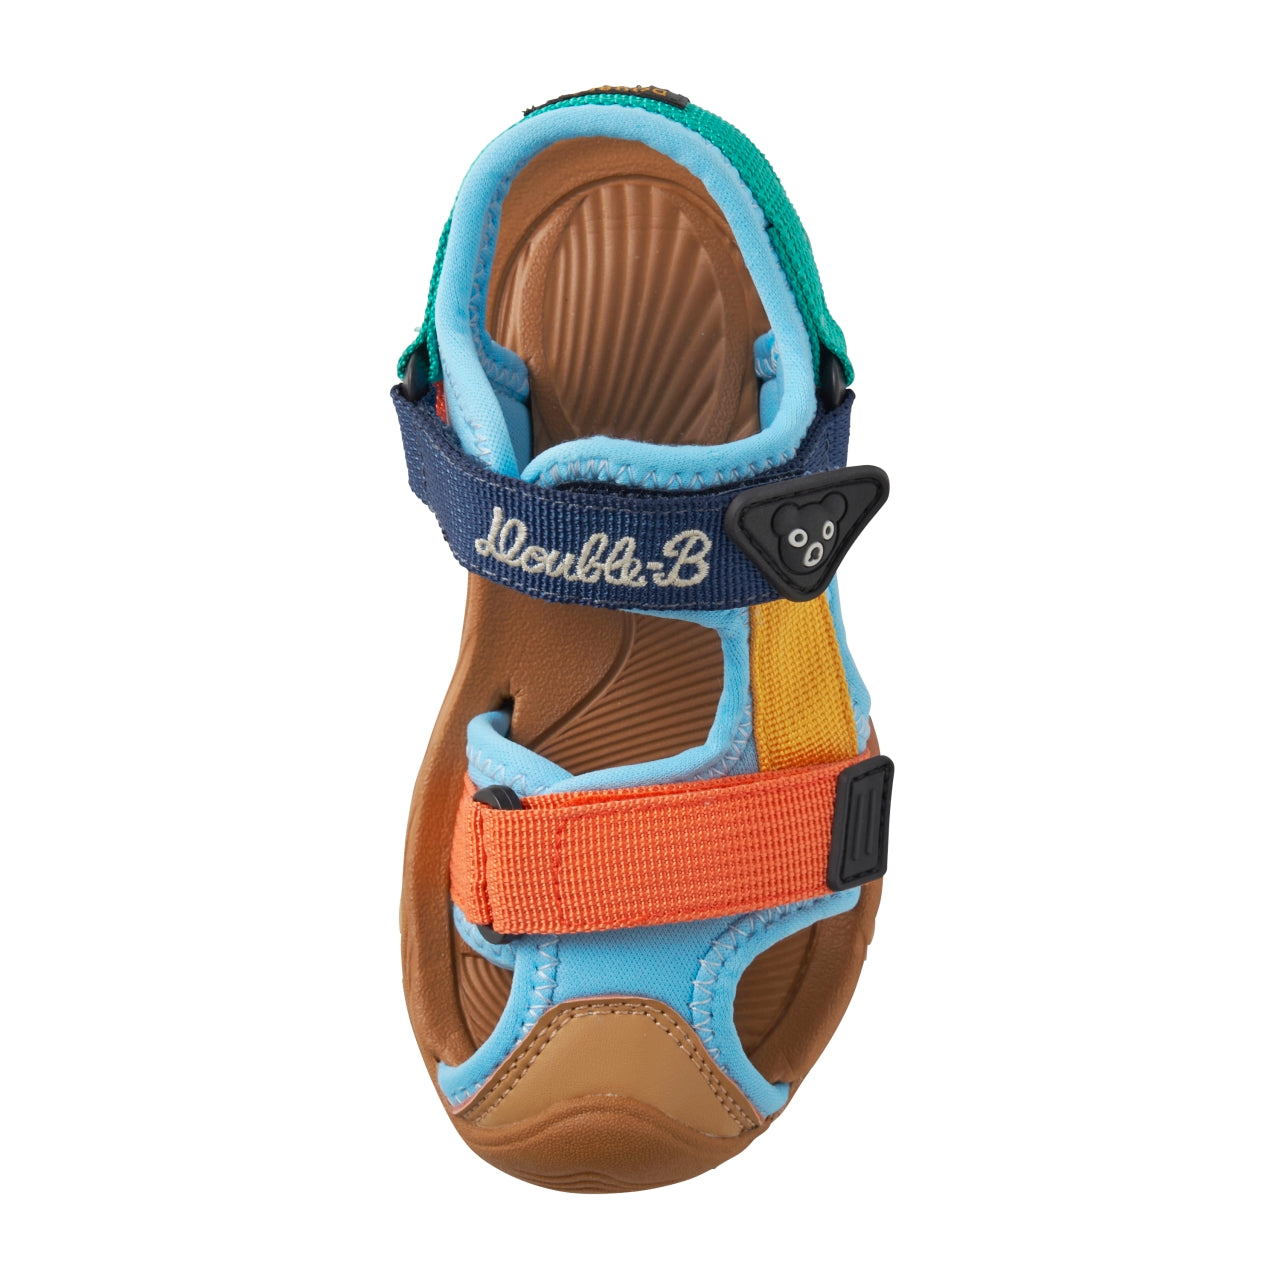 DOUBLE_B Bear Scout Sandals for Kids